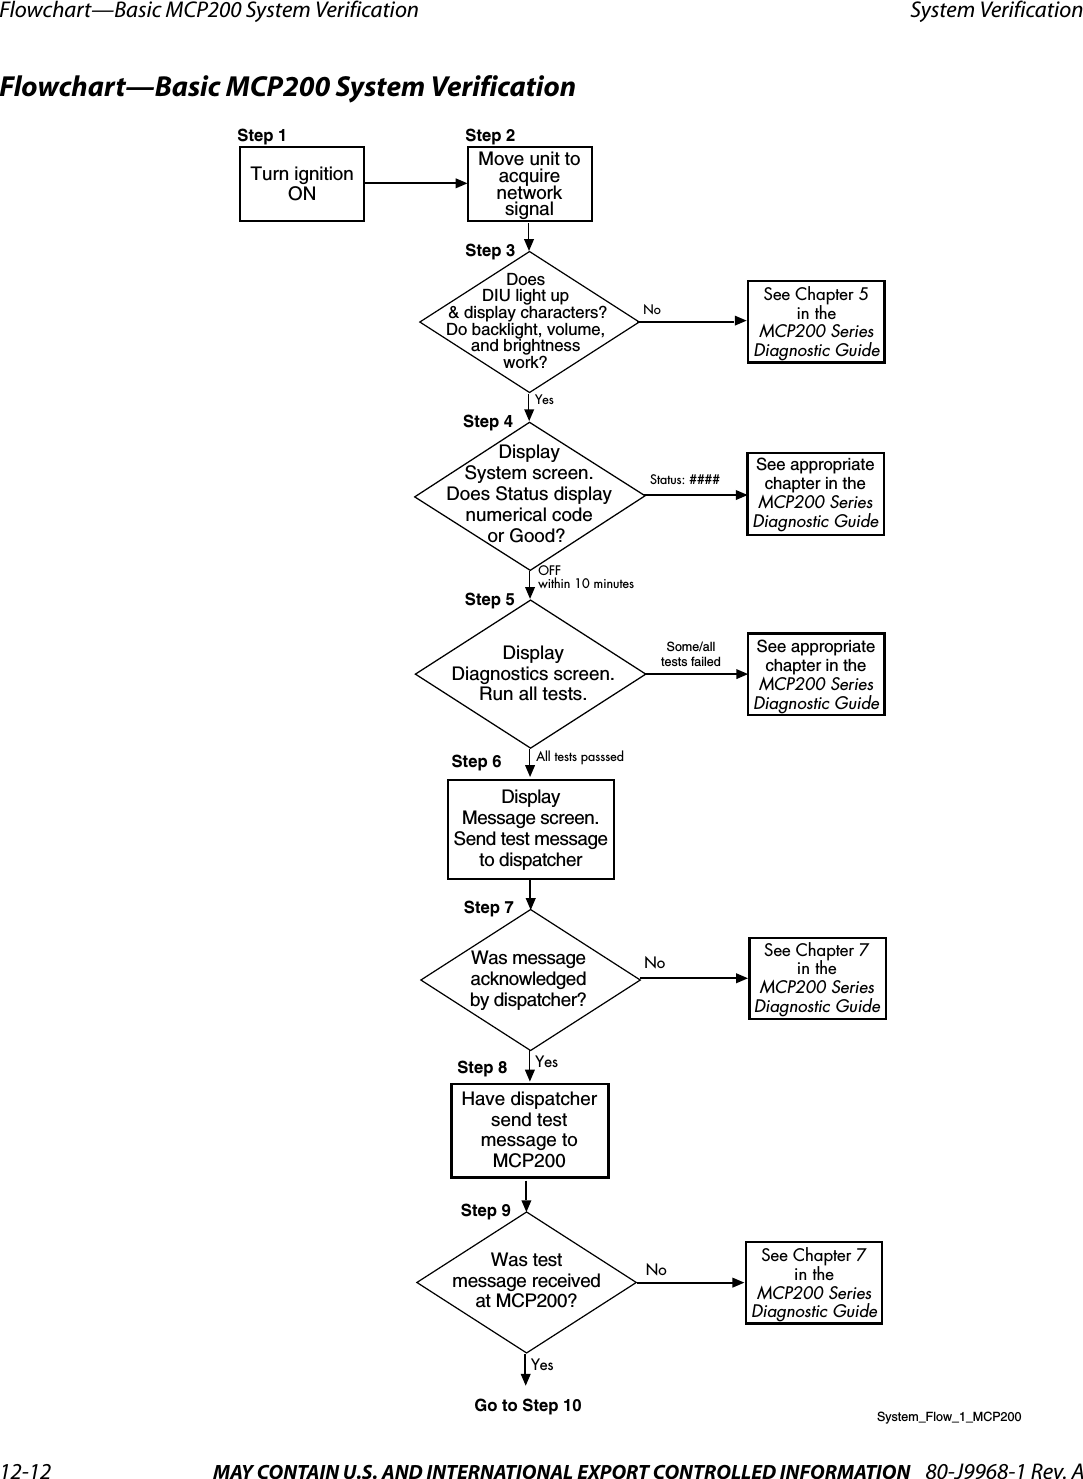 Flowchart—Basic MCP200 System Verification System Verification12-12 MAY CONTAIN U.S. AND INTERNATIONAL EXPORT CONTROLLED INFORMATION 80-J9968-1 Rev. ADO NOT COPYFlowchart—Basic MCP200 System VerificationTurn ignitionONStep 2YesMove unit toacquirenetworksignalStep 1System_Flow_1_MCP200Step 3DoesDIU light up &amp; display characters?Do backlight, volume,and brightnesswork?See Chapter 5in theMCP200 SeriesDiagnostic GuideNoAll tests passsedStatus: #### See appropriatechapter in theMCP200 SeriesDiagnostic GuideDisplaySystem screen.Does Status displaynumerical codeor Good? Step 5OFFwithin 10 minutesStep 4See appropriatechapter in theMCP200 SeriesDiagnostic GuideDisplayDiagnostics screen.Run all tests.Some/alltests failedStep 7Was messageacknowledgedby dispatcher?Step 6DisplayMessage screen.Send test messageto dispatcherStep 8Have dispatchersend testmessage toMCP200NoYesStep 9See Chapter 7in theMCP200 SeriesDiagnostic GuideWas testmessage receivedat MCP200?NoYesGo to Step 10See Chapter 7in theMCP200 SeriesDiagnostic Guide